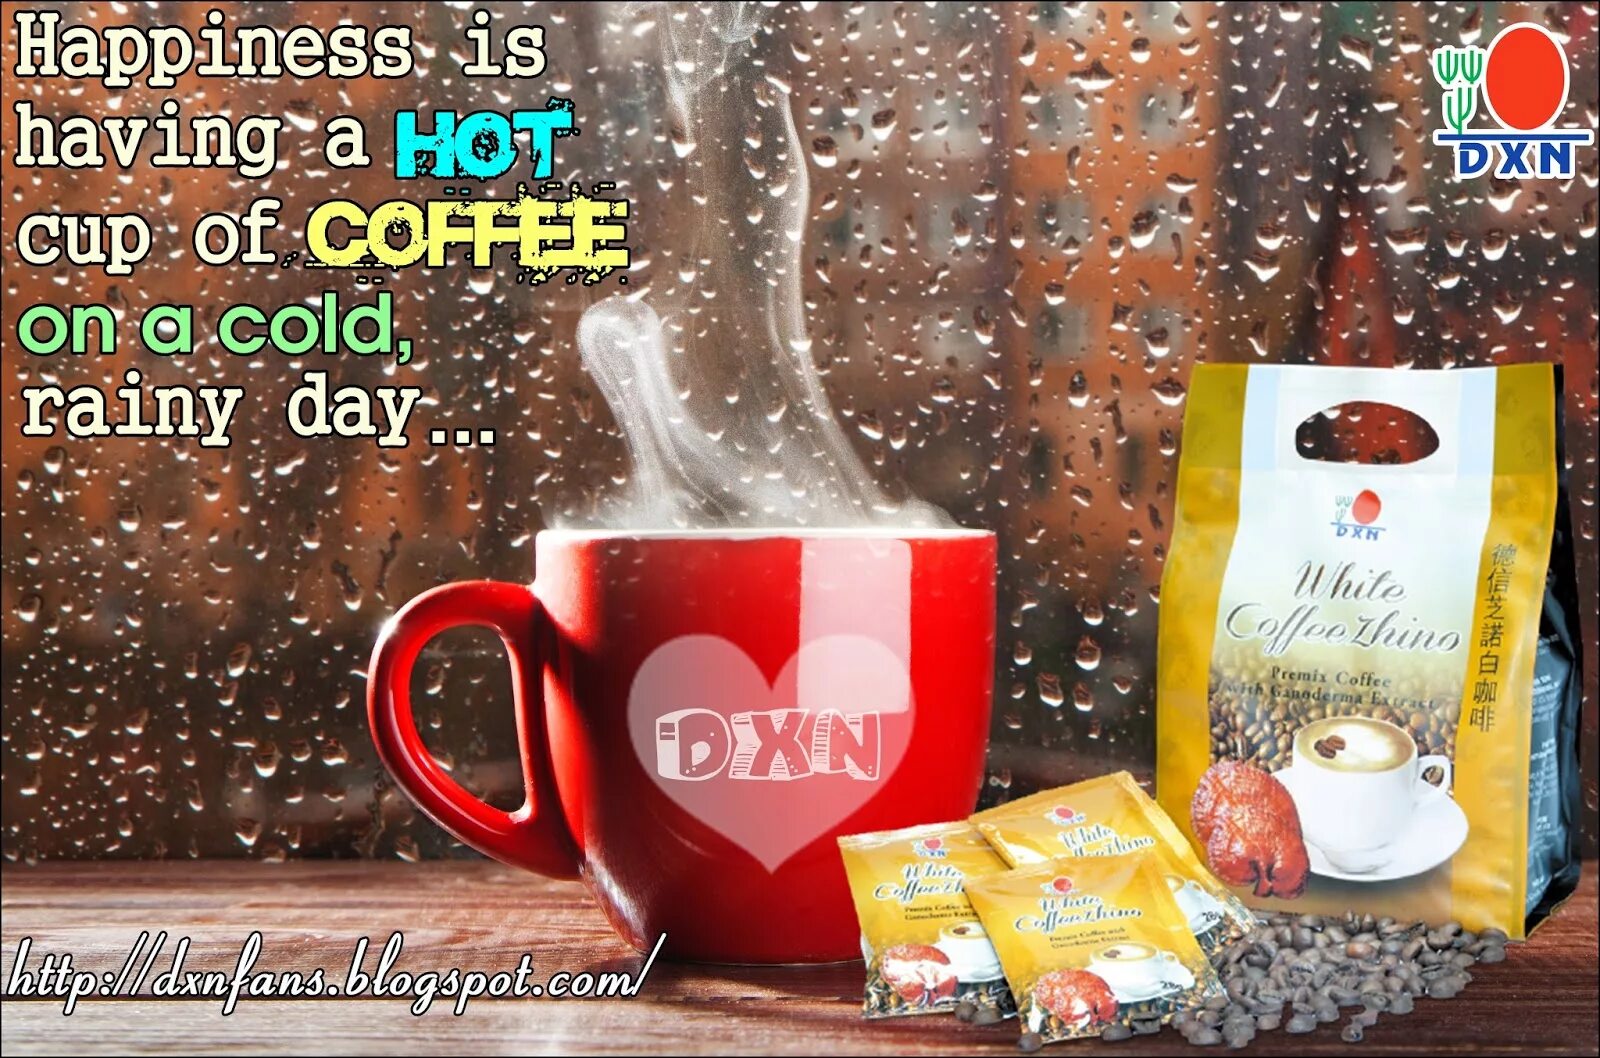 DXN Coffee. DXN Vita COFE. Eu Cafe DXN. Enjoy a Cold Day in a warm House Design product.